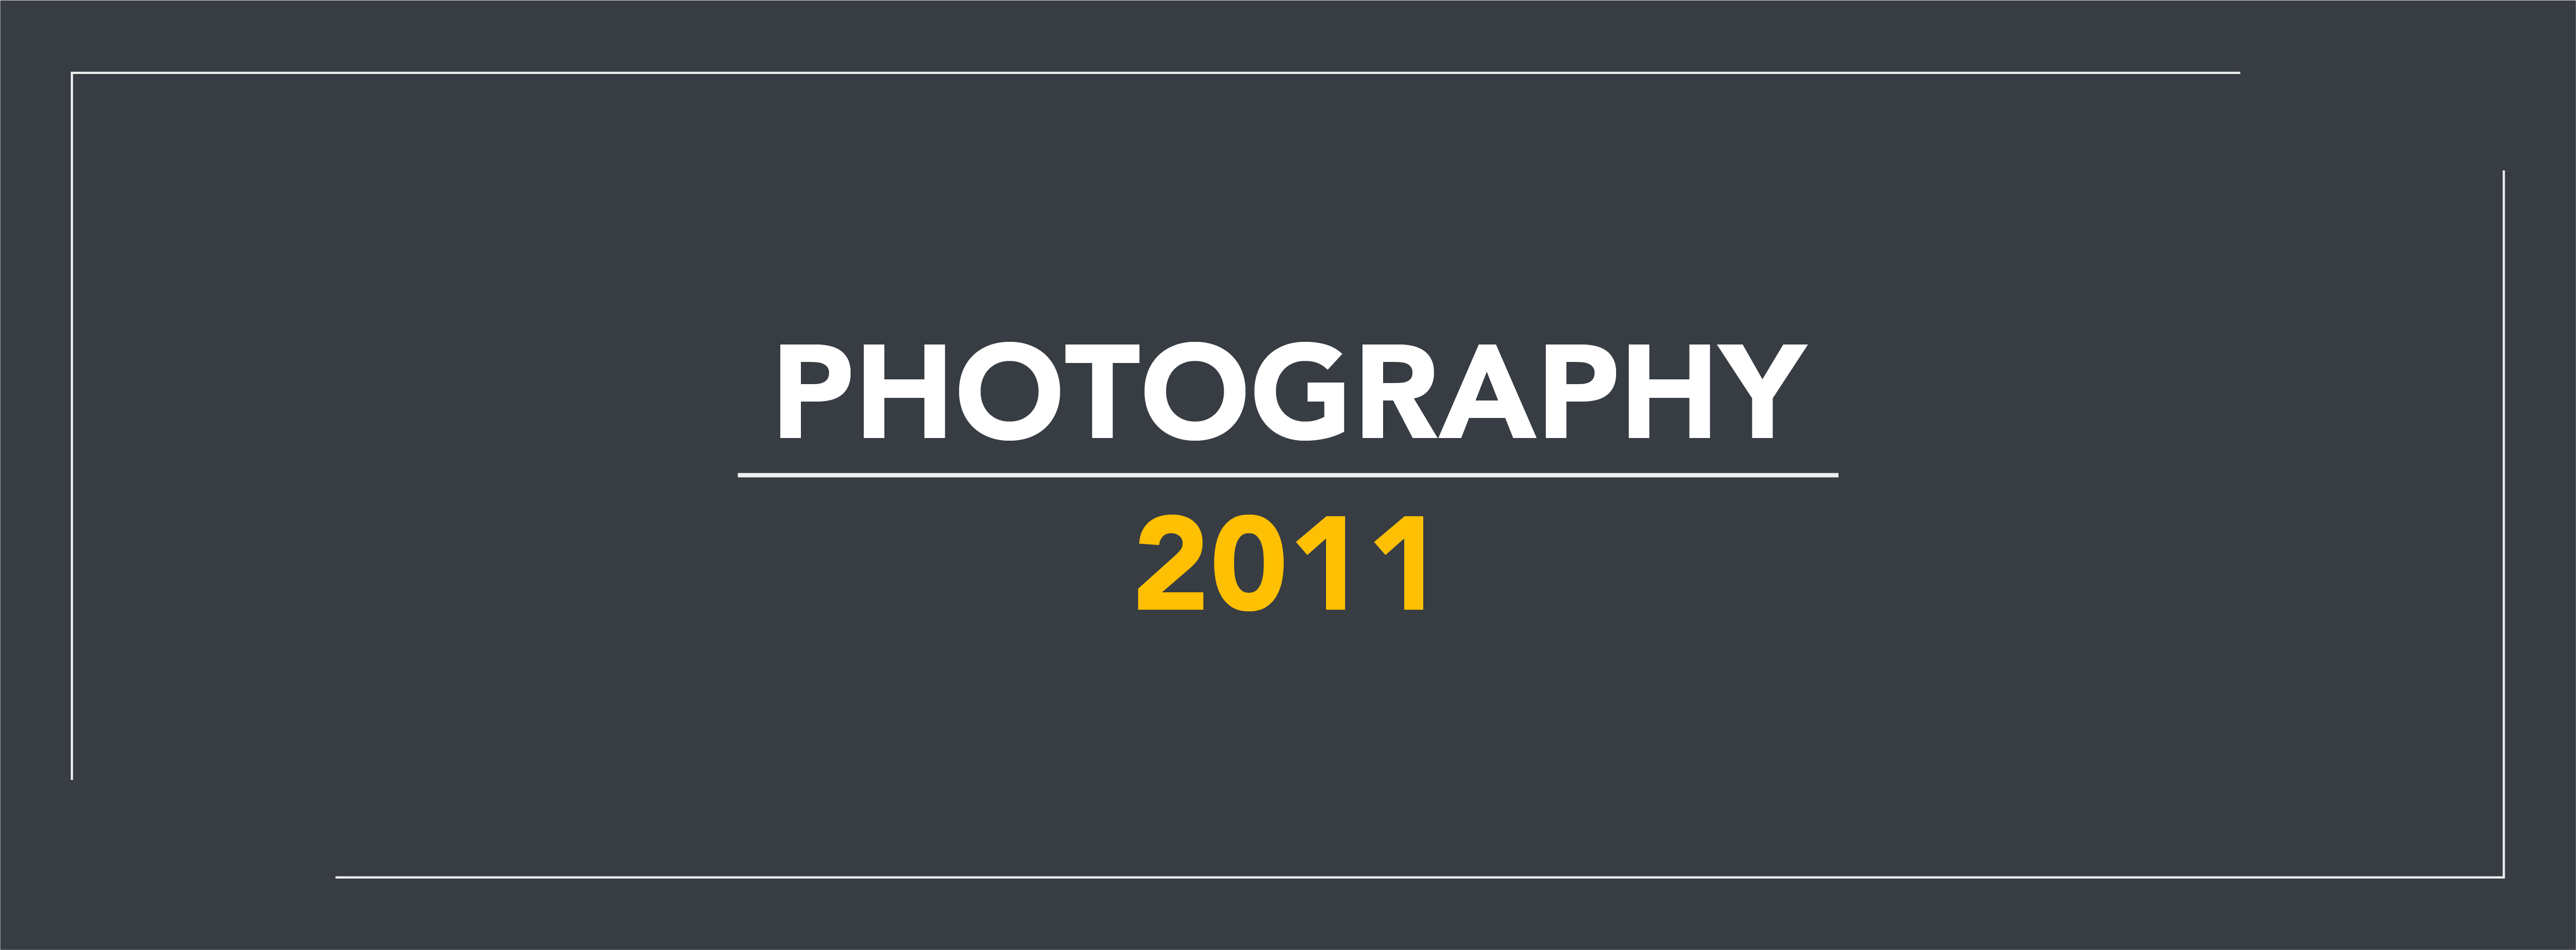 photographic competitions